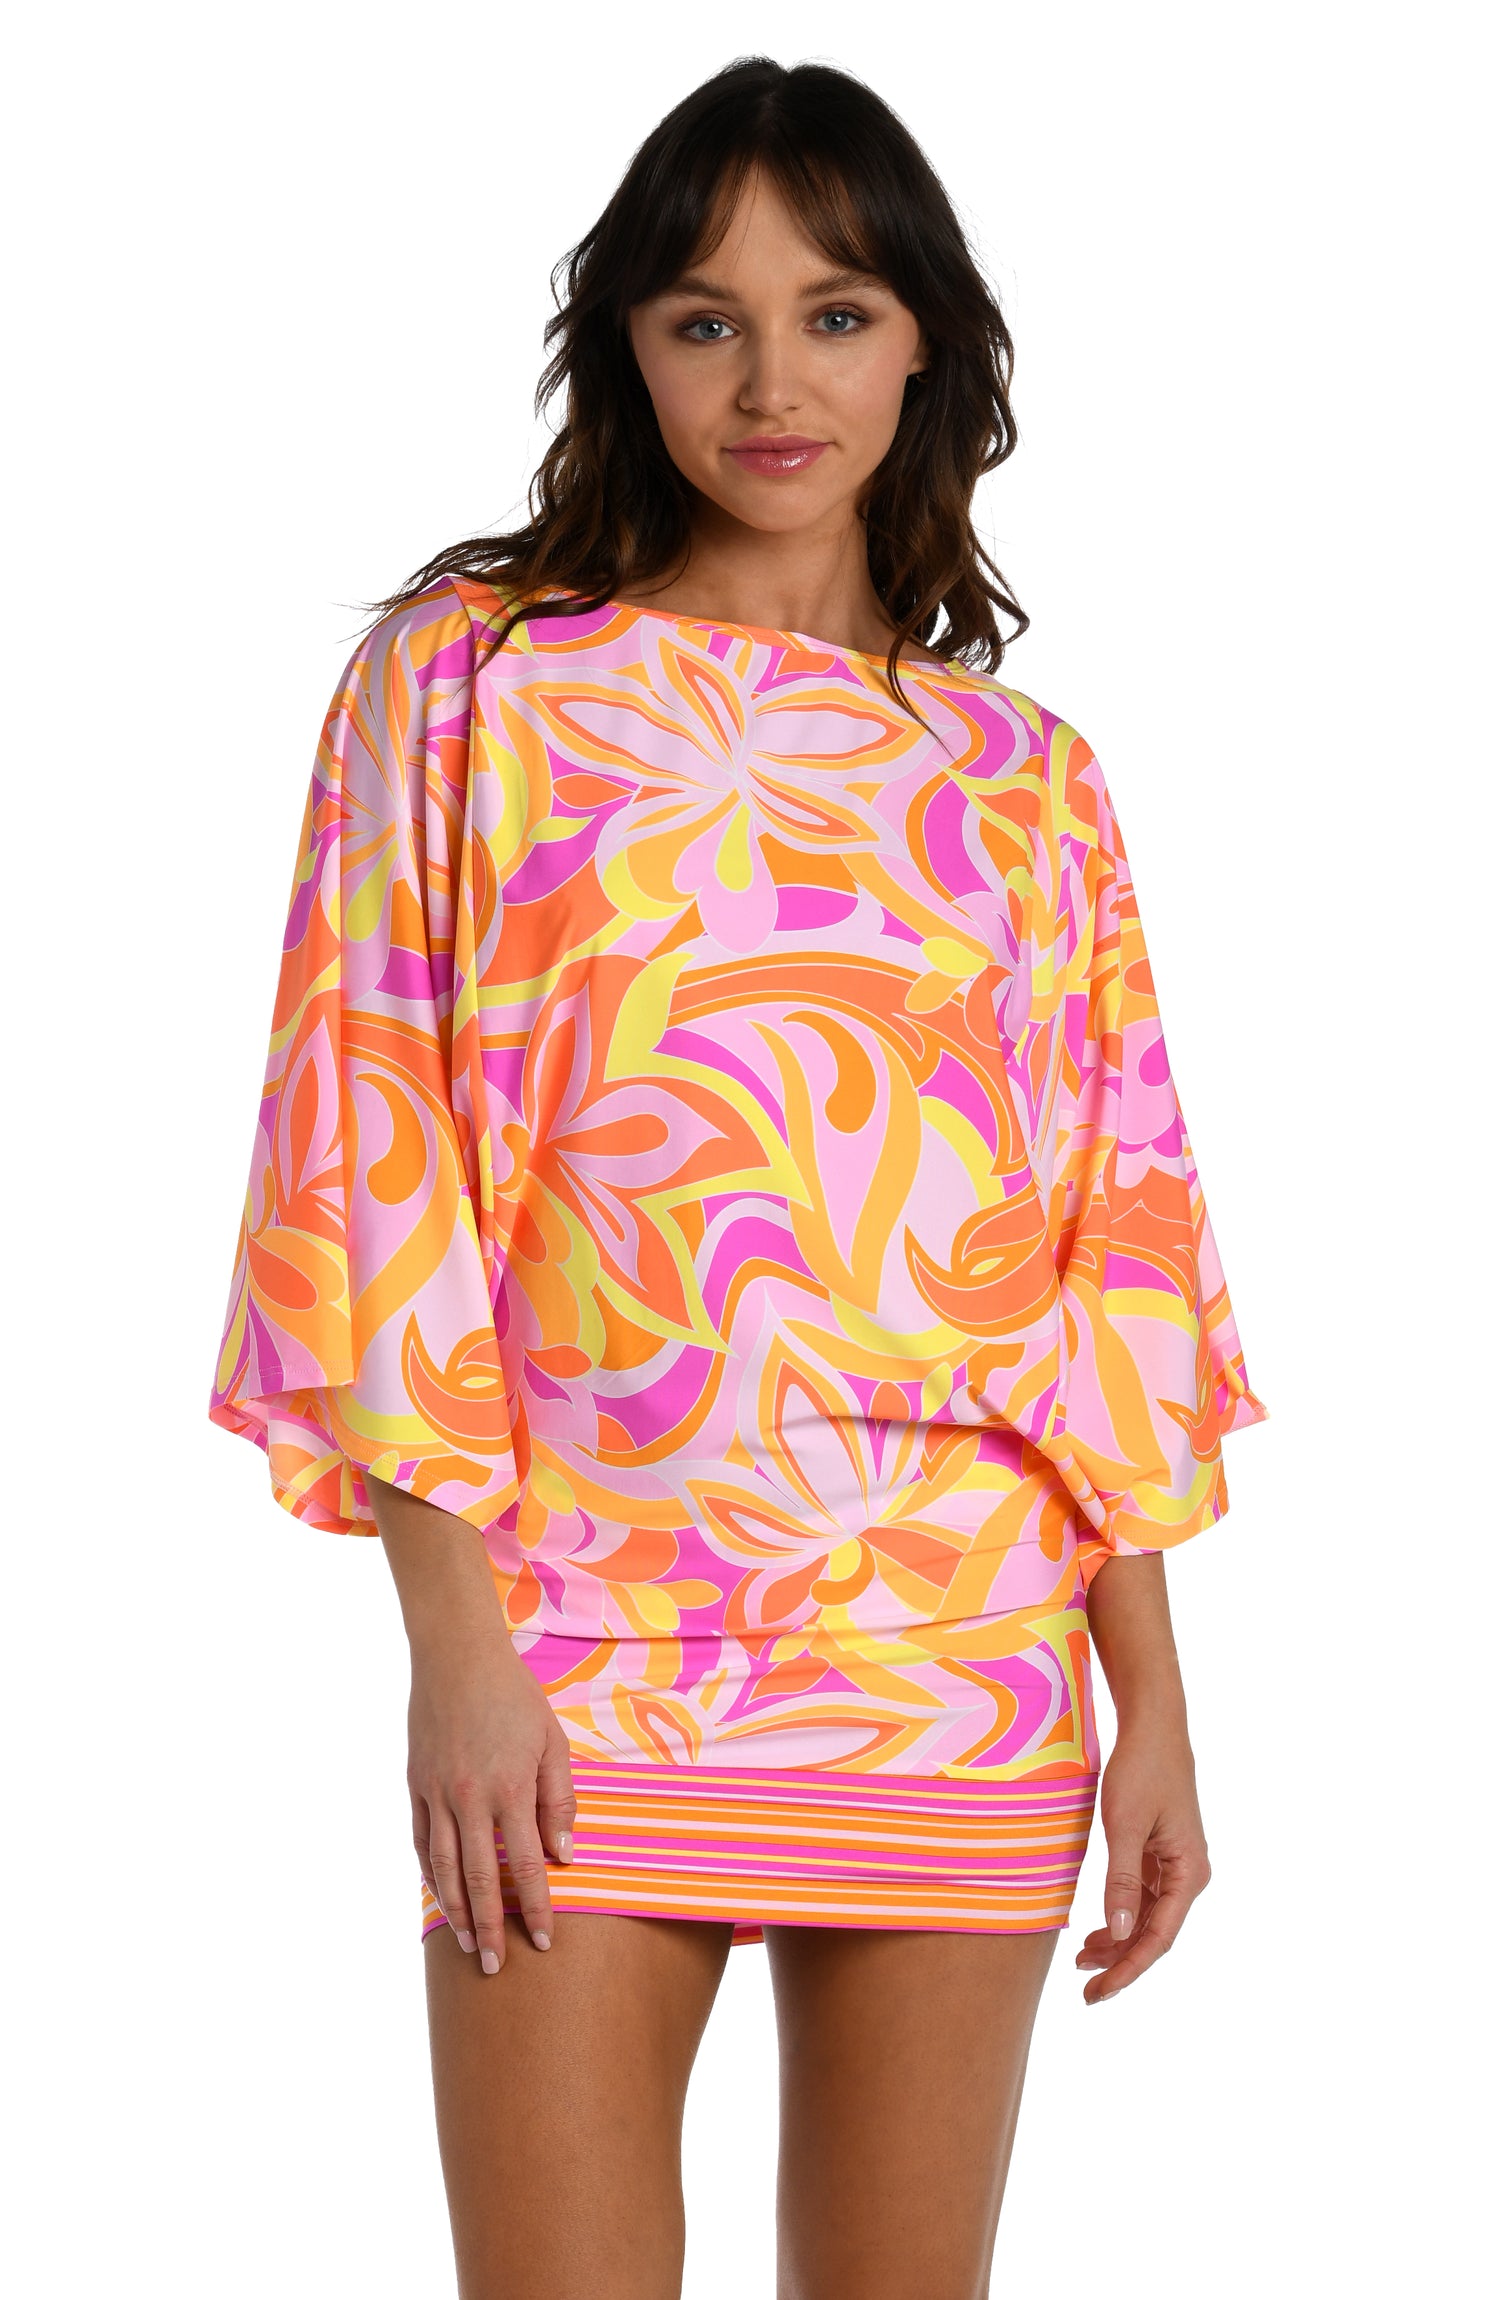 Model is wearing a pink, white, and orange multicolored retro printed short sleeve tunic cover up from our Retro Swirl collection.